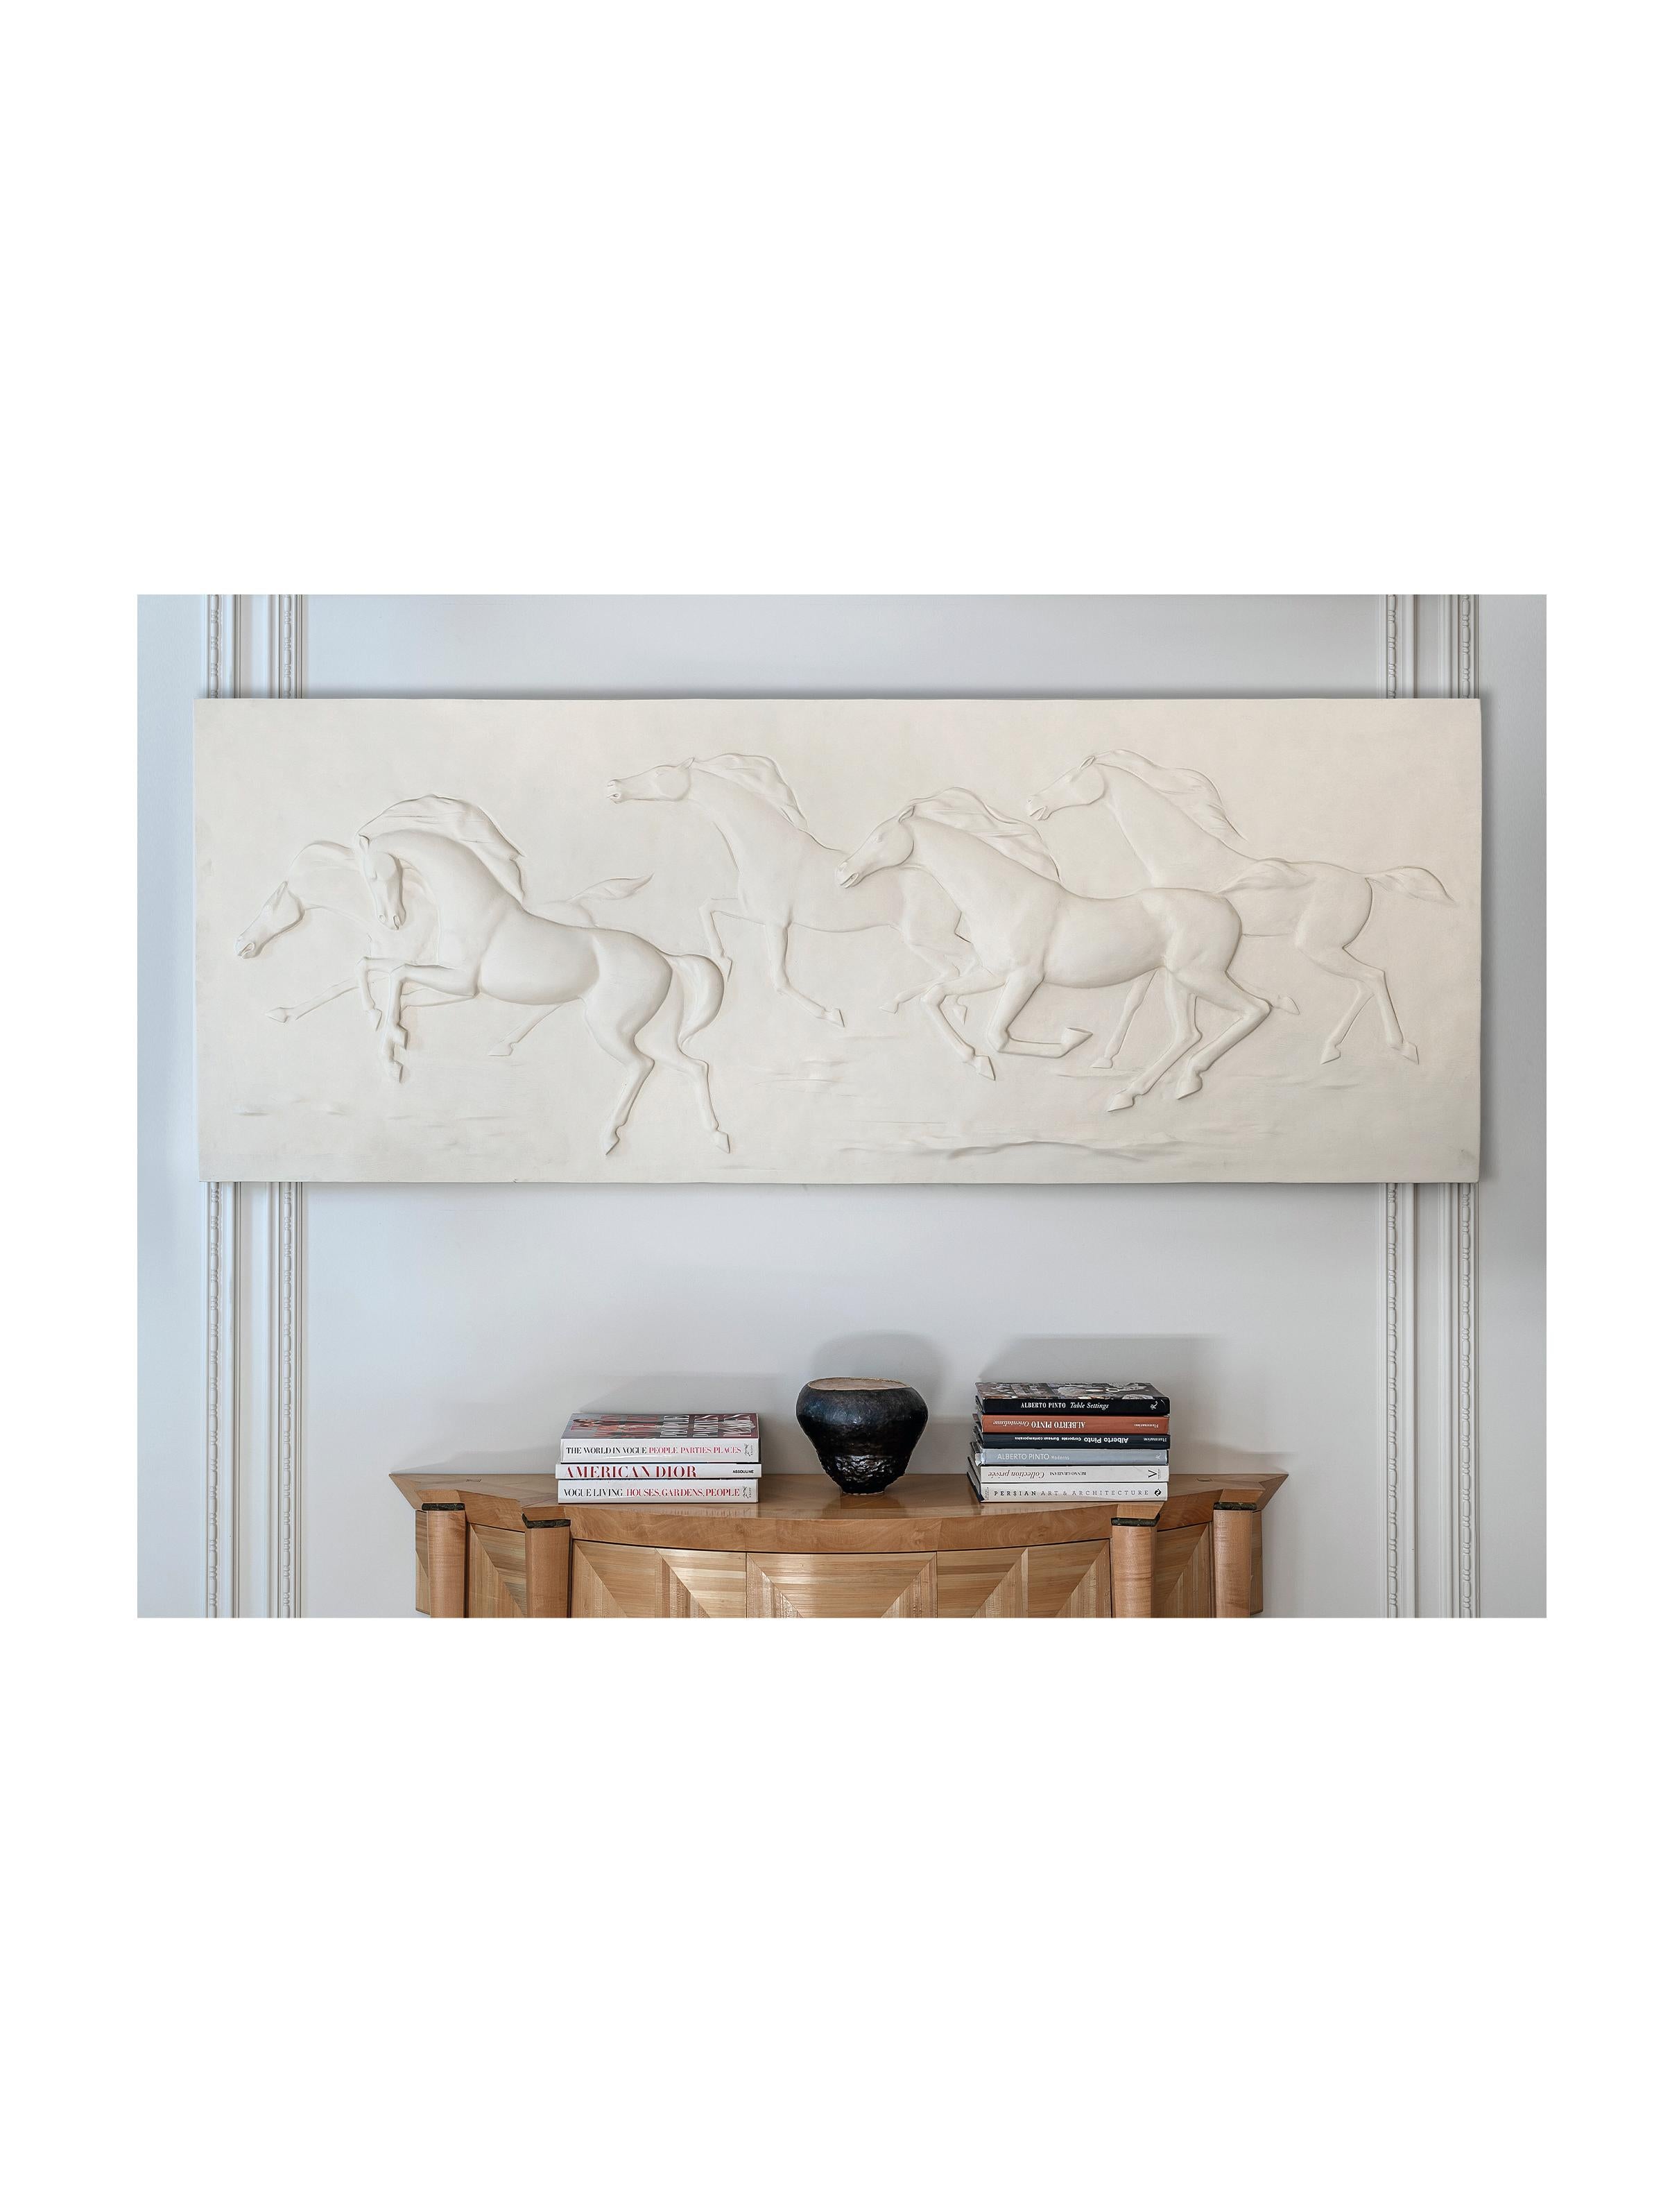 Lightweight Plaster, hand-made

Designed by Leyla Uluhanli

Limited Edition

Size Europe: 211 x 84 cm

Size US: 83 x 33 in